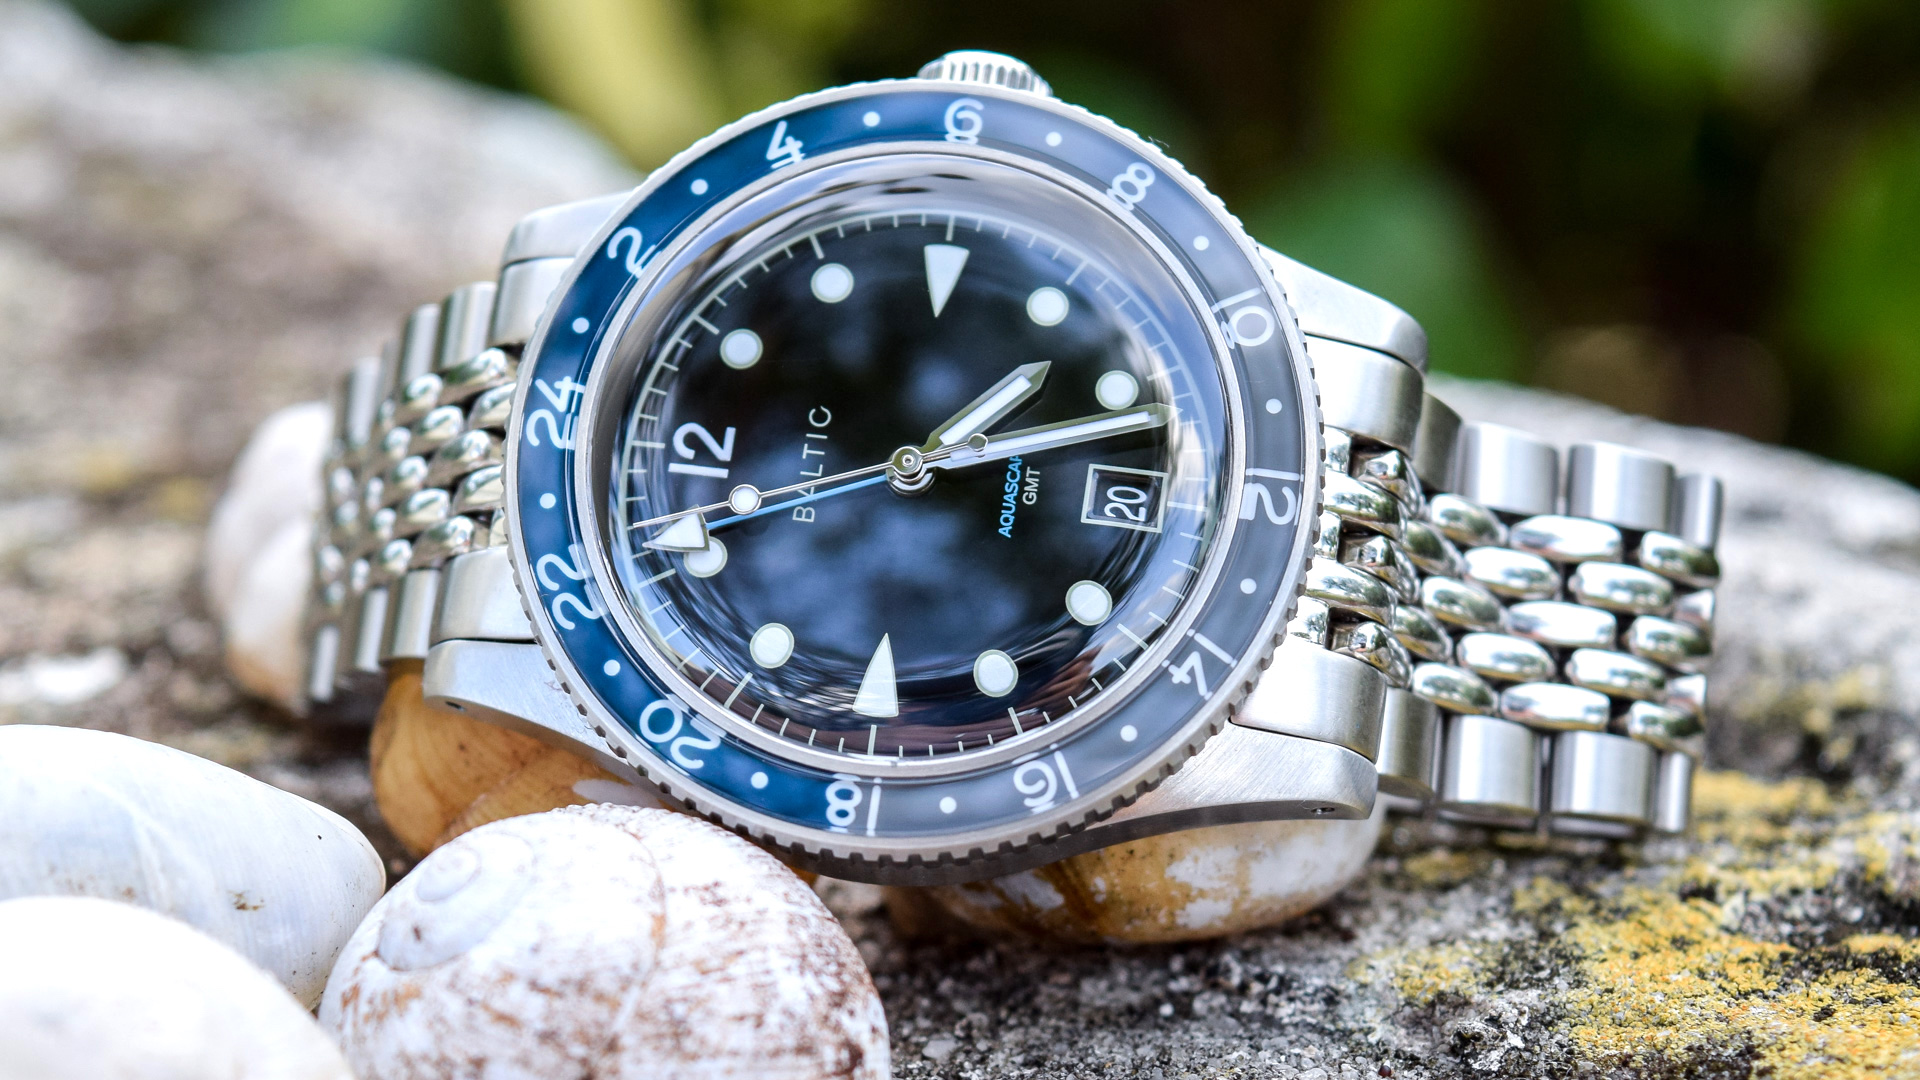 Watch Review: Baltic Aquascaphe GMT